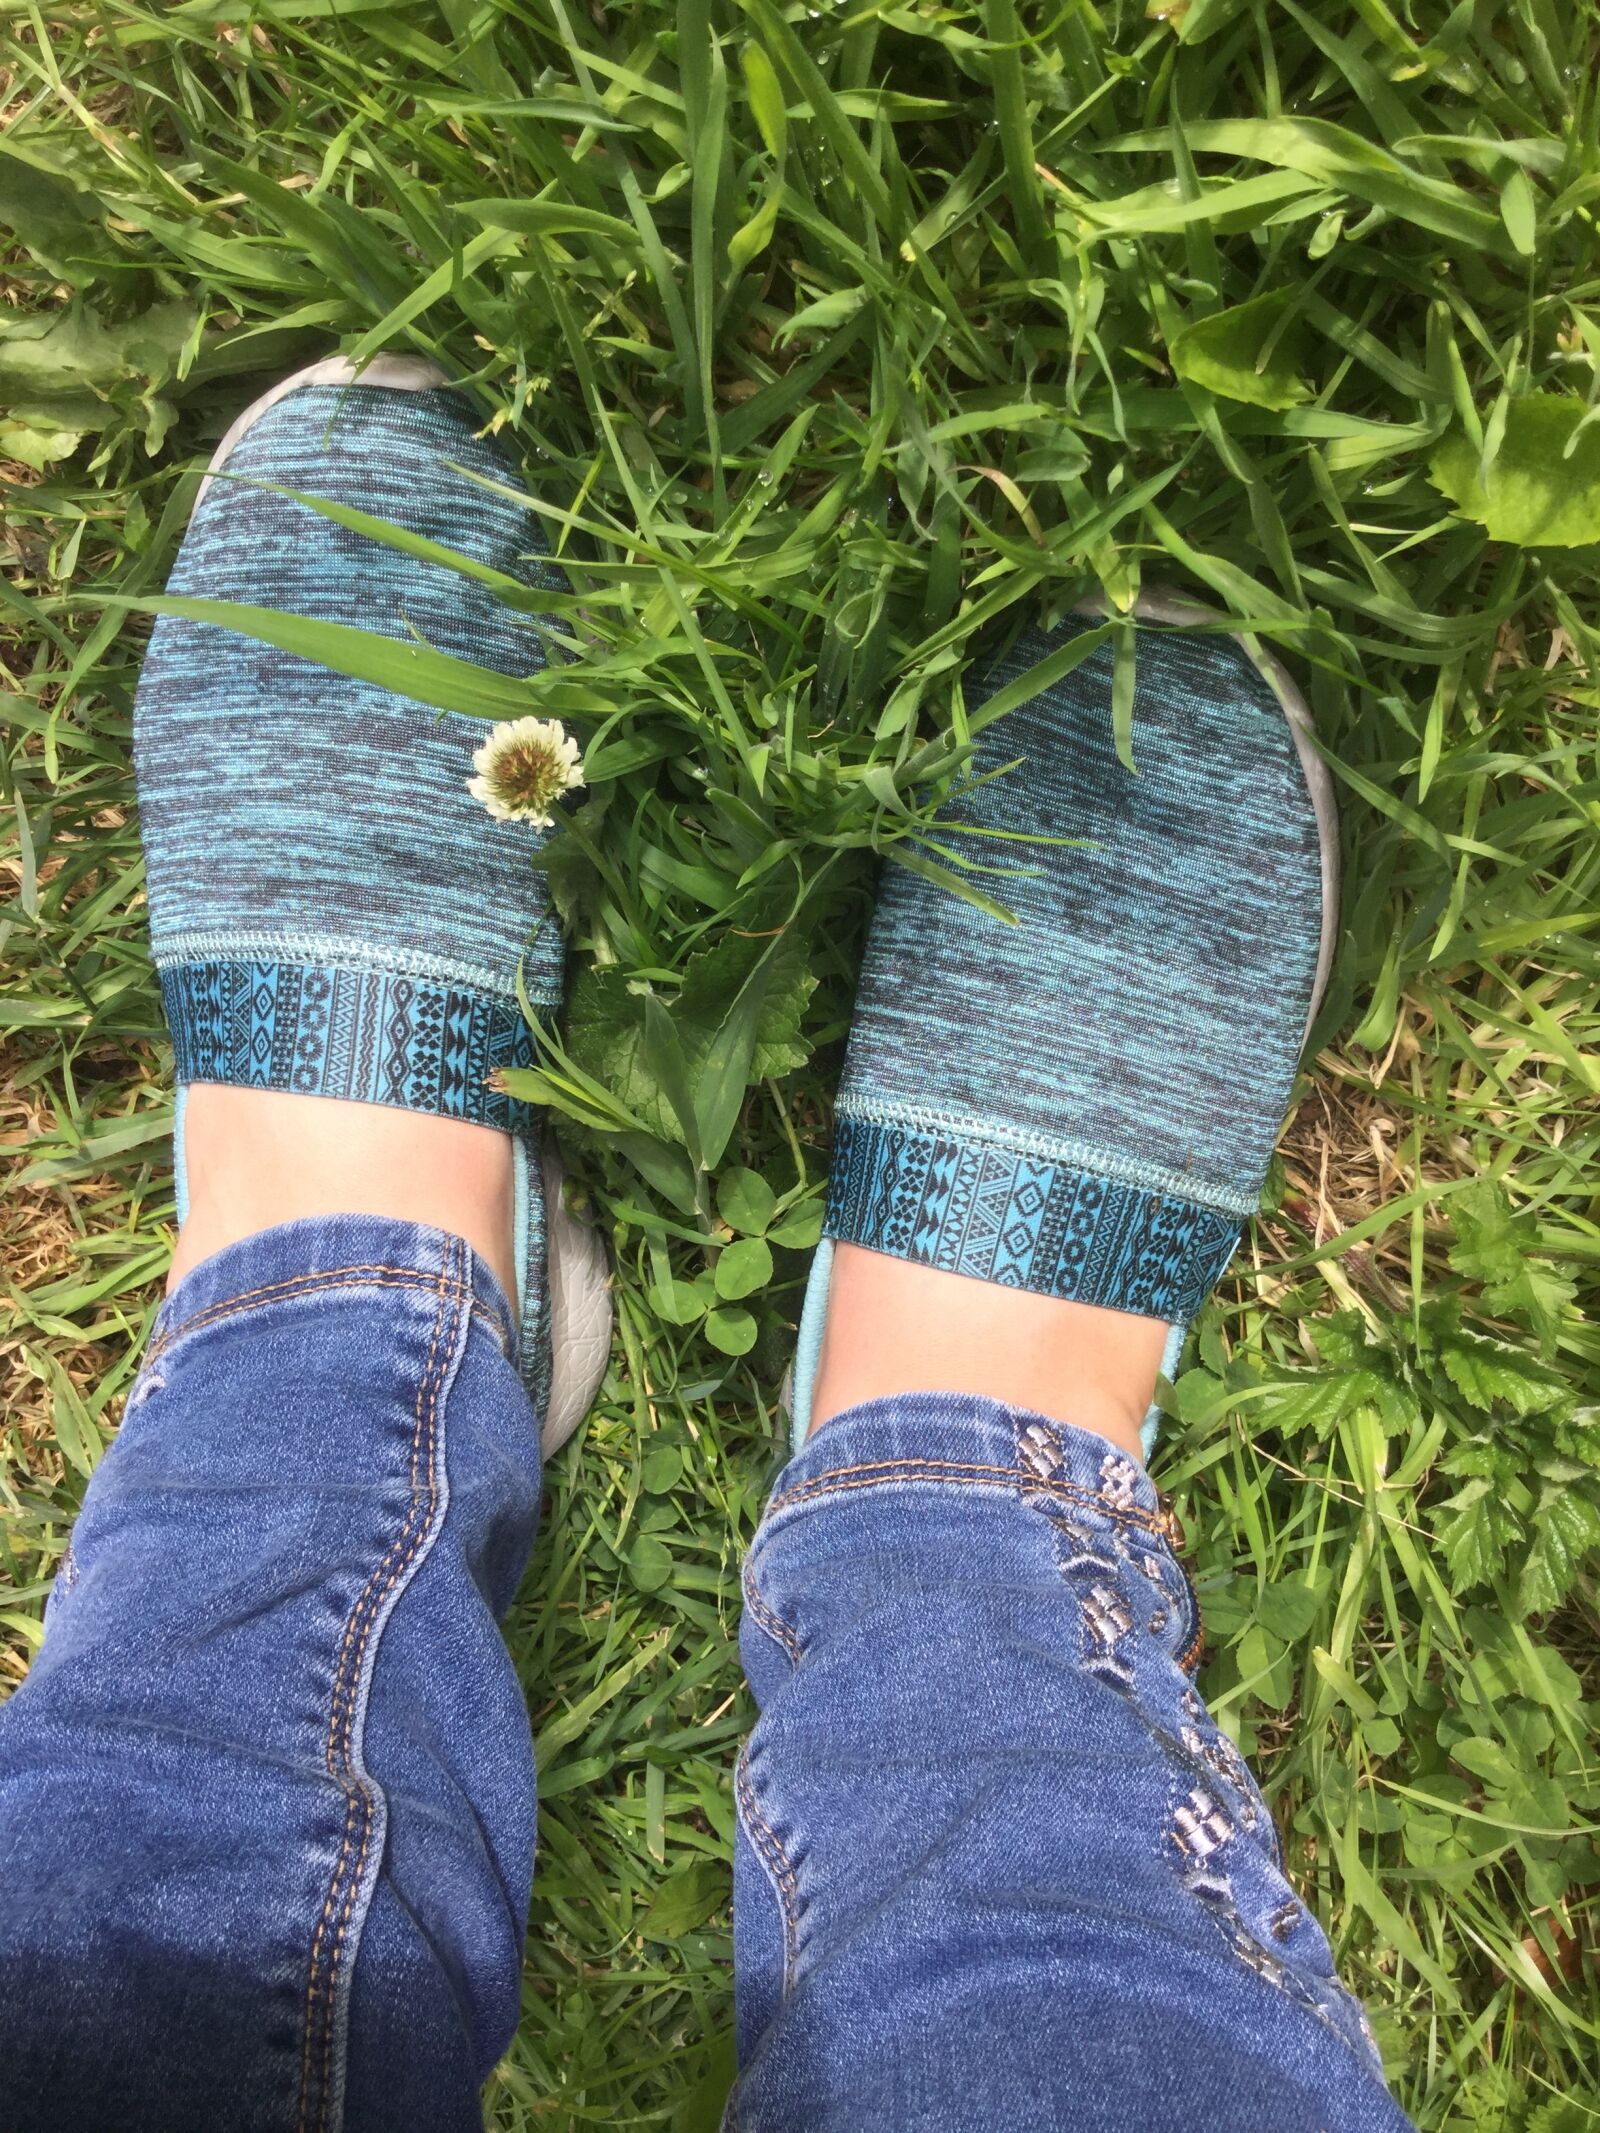 iPad Air 2 back camera 3.3mm f/2.4 sample photo. Feet, jeans, shoes, grass photography